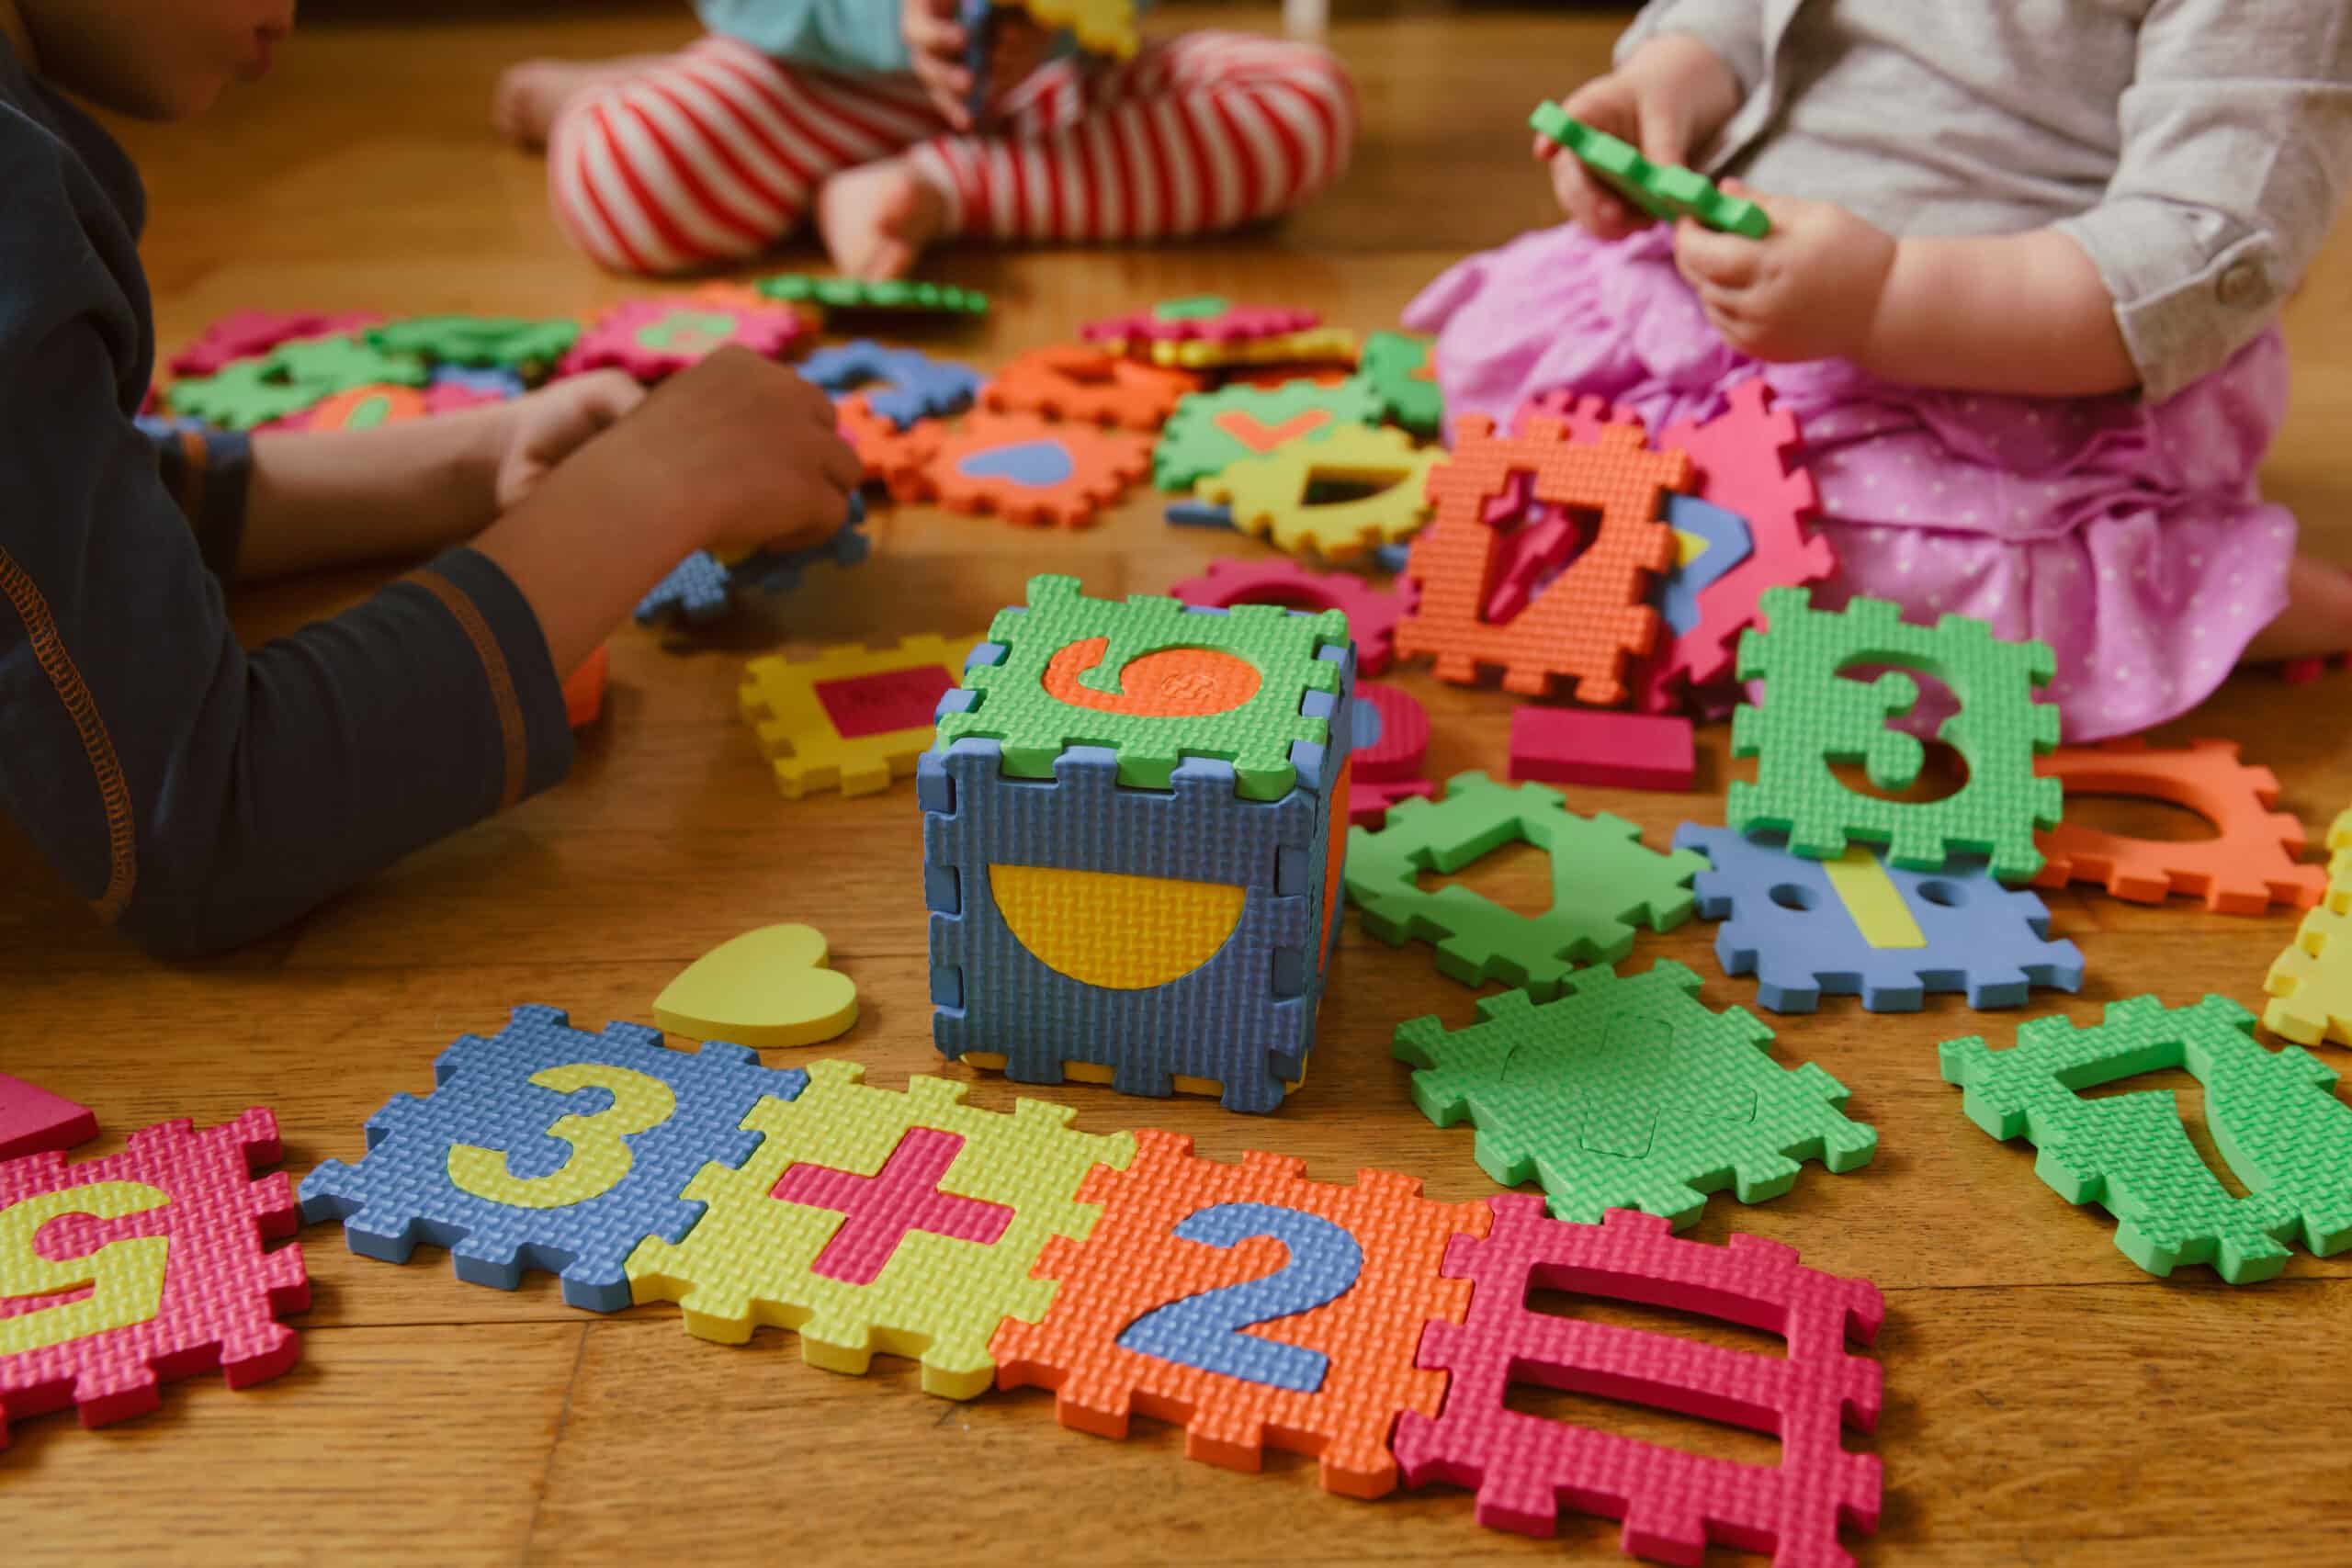 kids playing with number puzzle